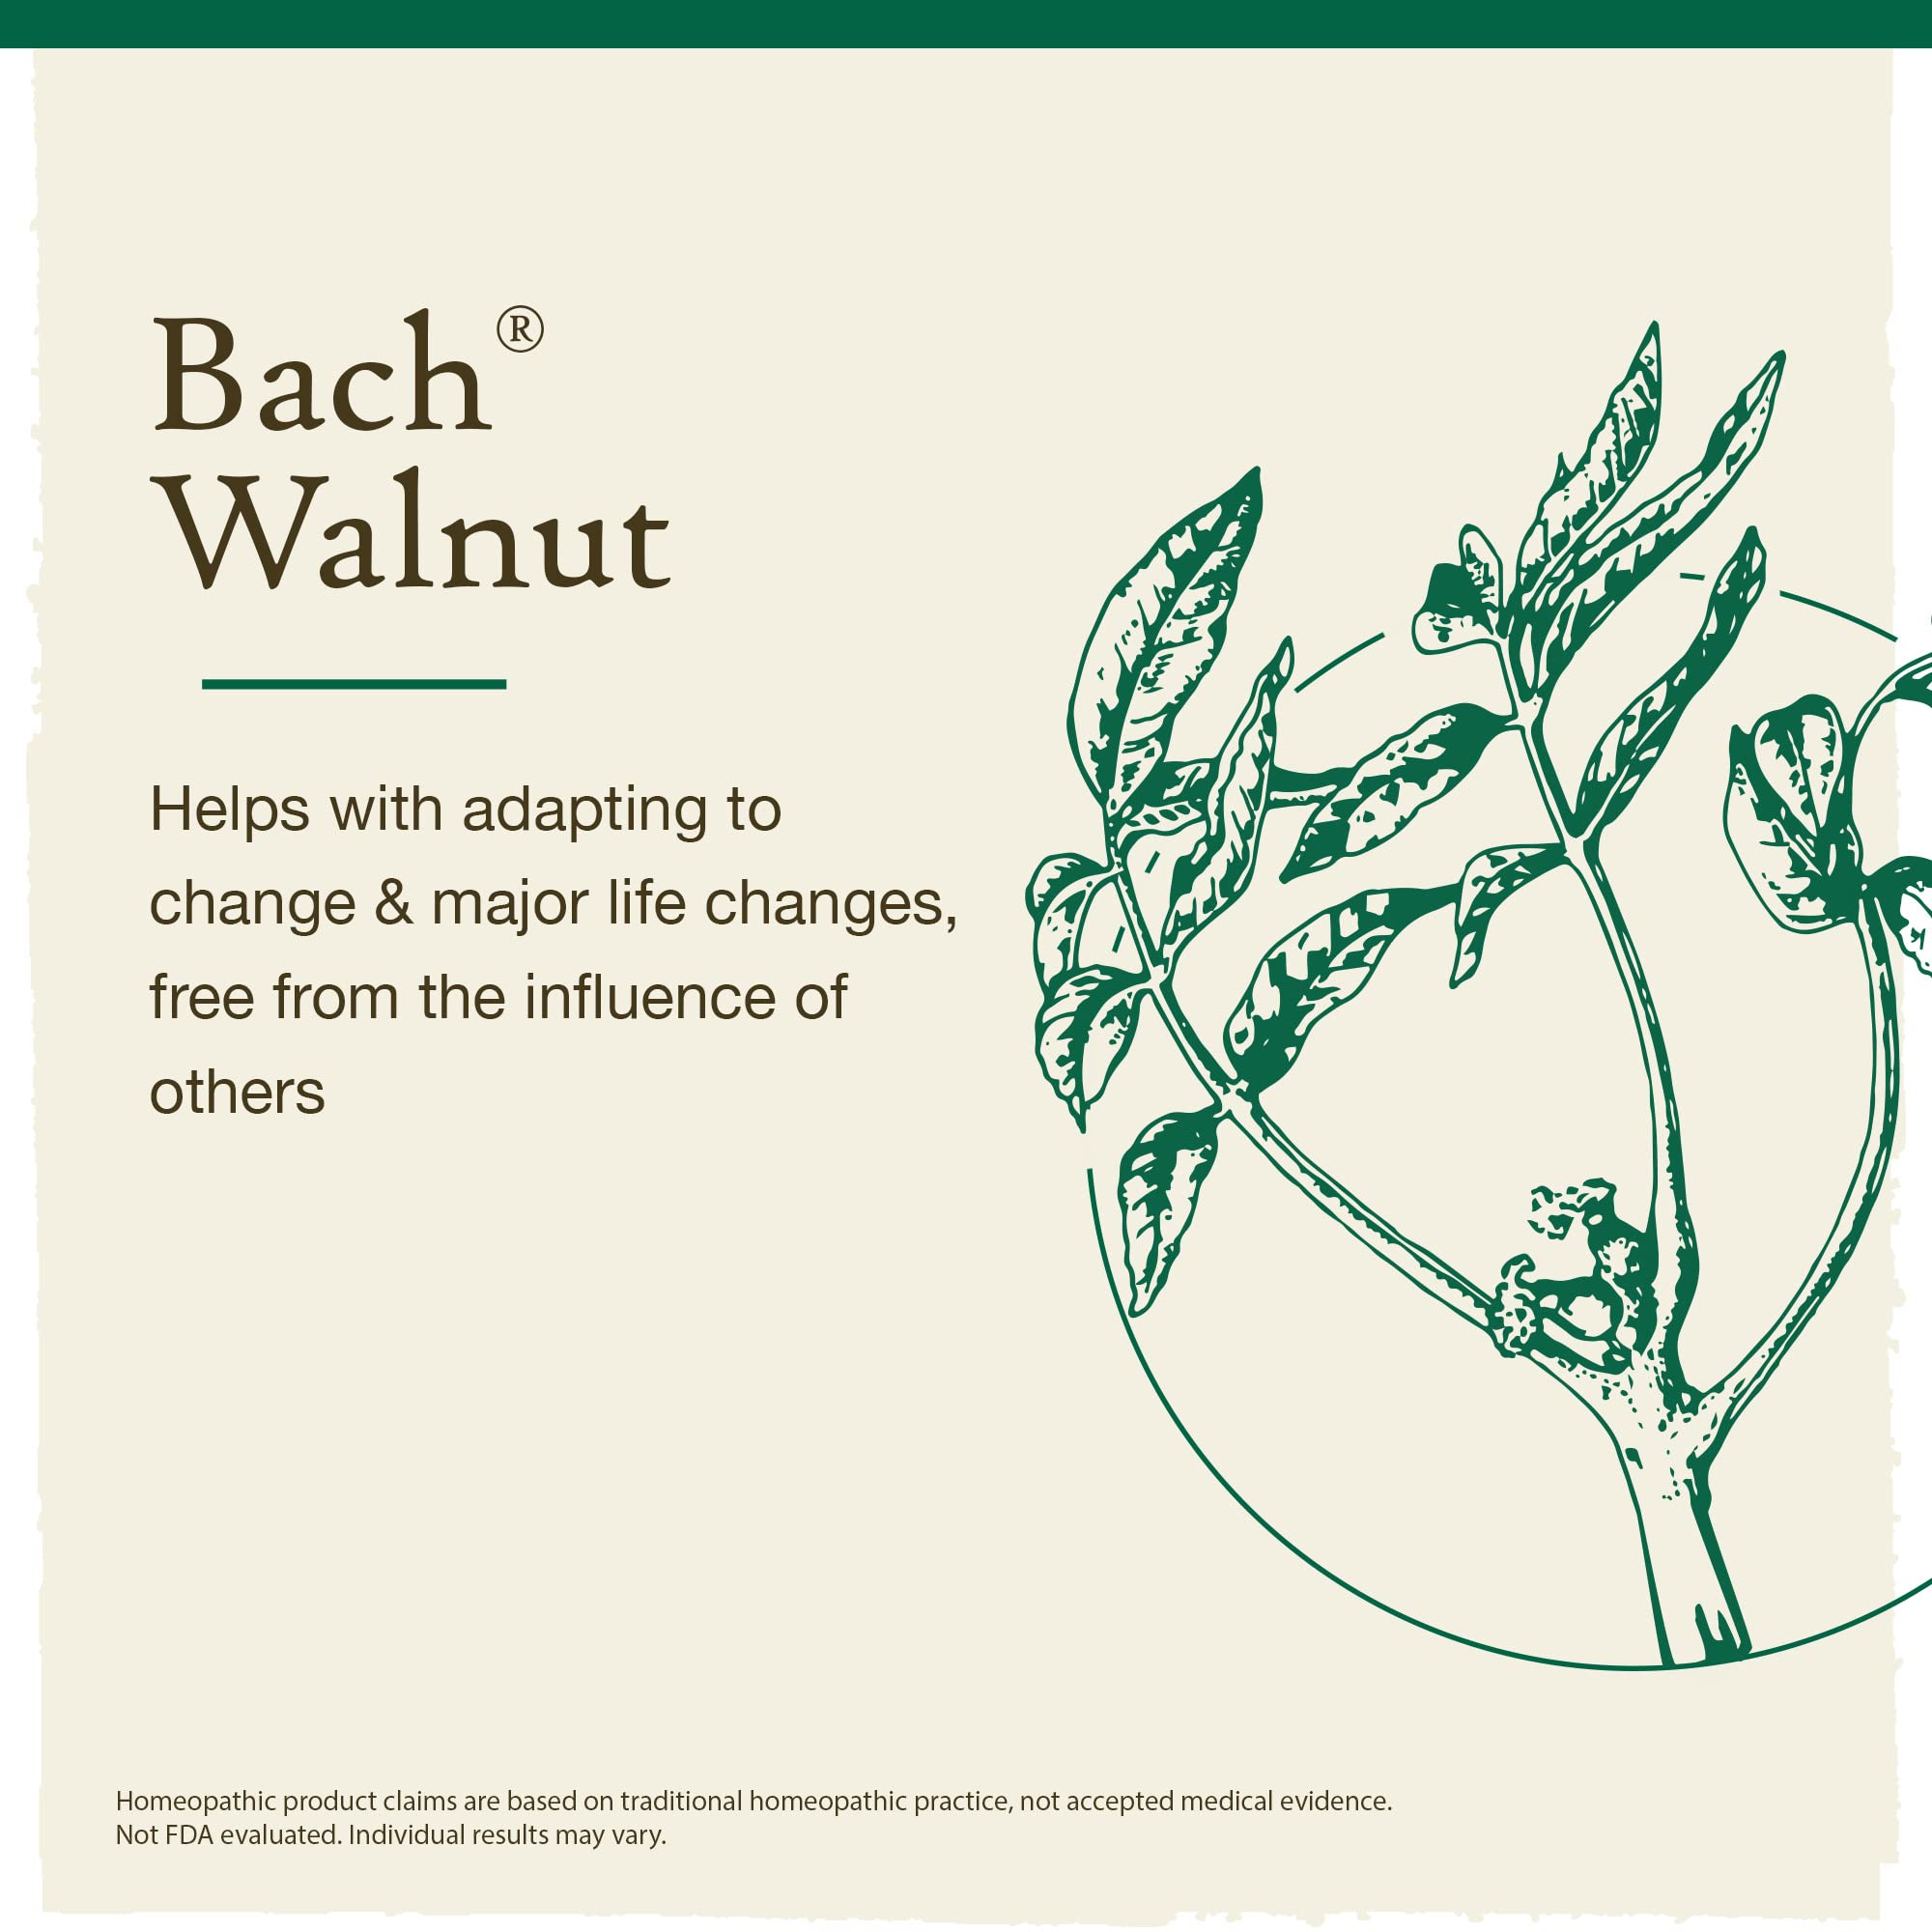 Bach Original Flower Remedies, Walnut for Adapting to Change (Non-Alcohol Formula), Natural Homeopathic Flower Essence, Holistic Wellness and Stress Relief, Vegan, 10mL Dropper, Clear